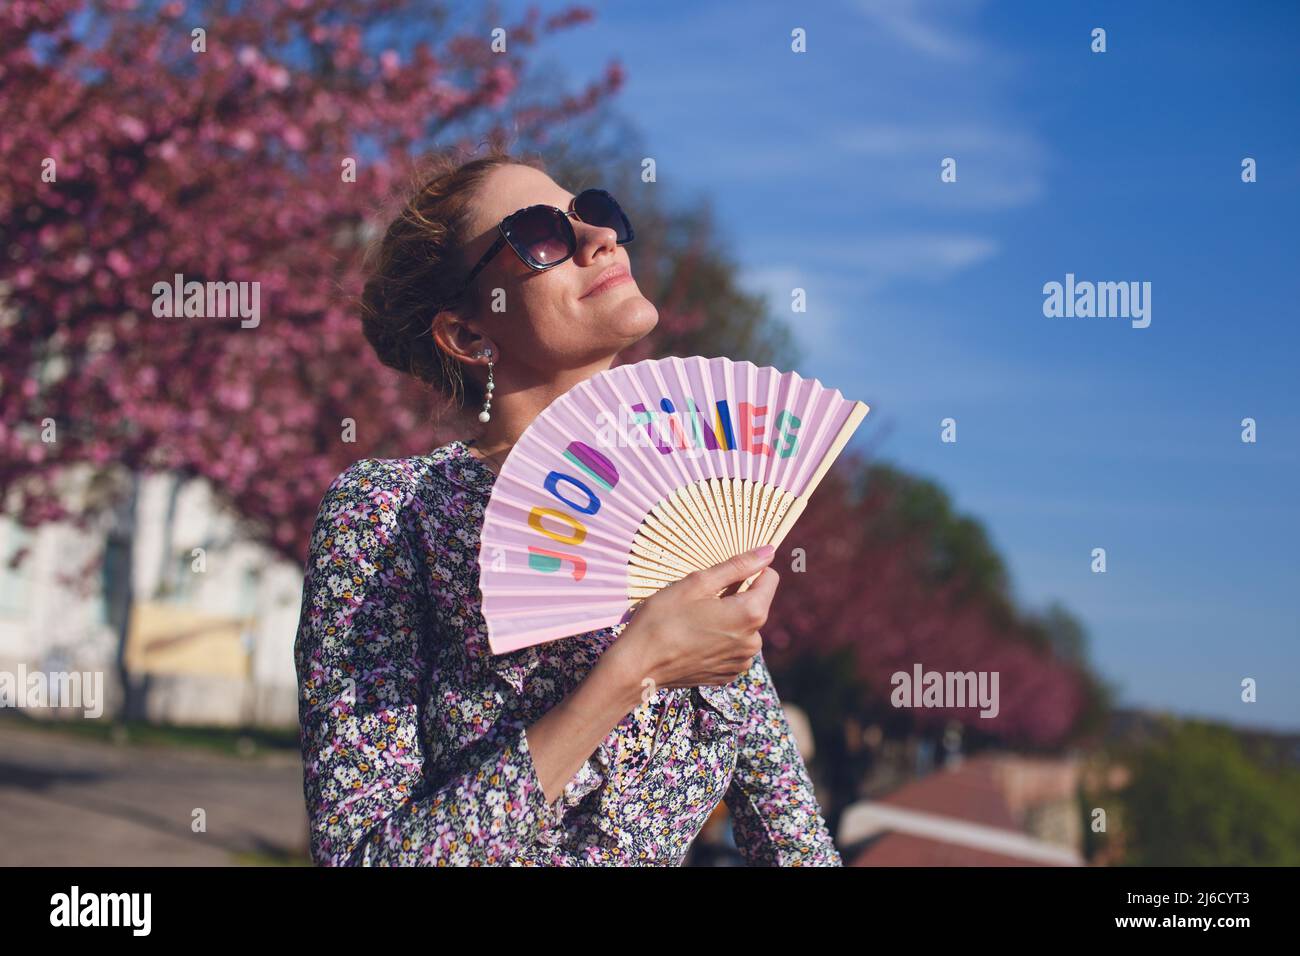 Nostalgic woman holding good times hand fan in sunset during springtime Stock Photo